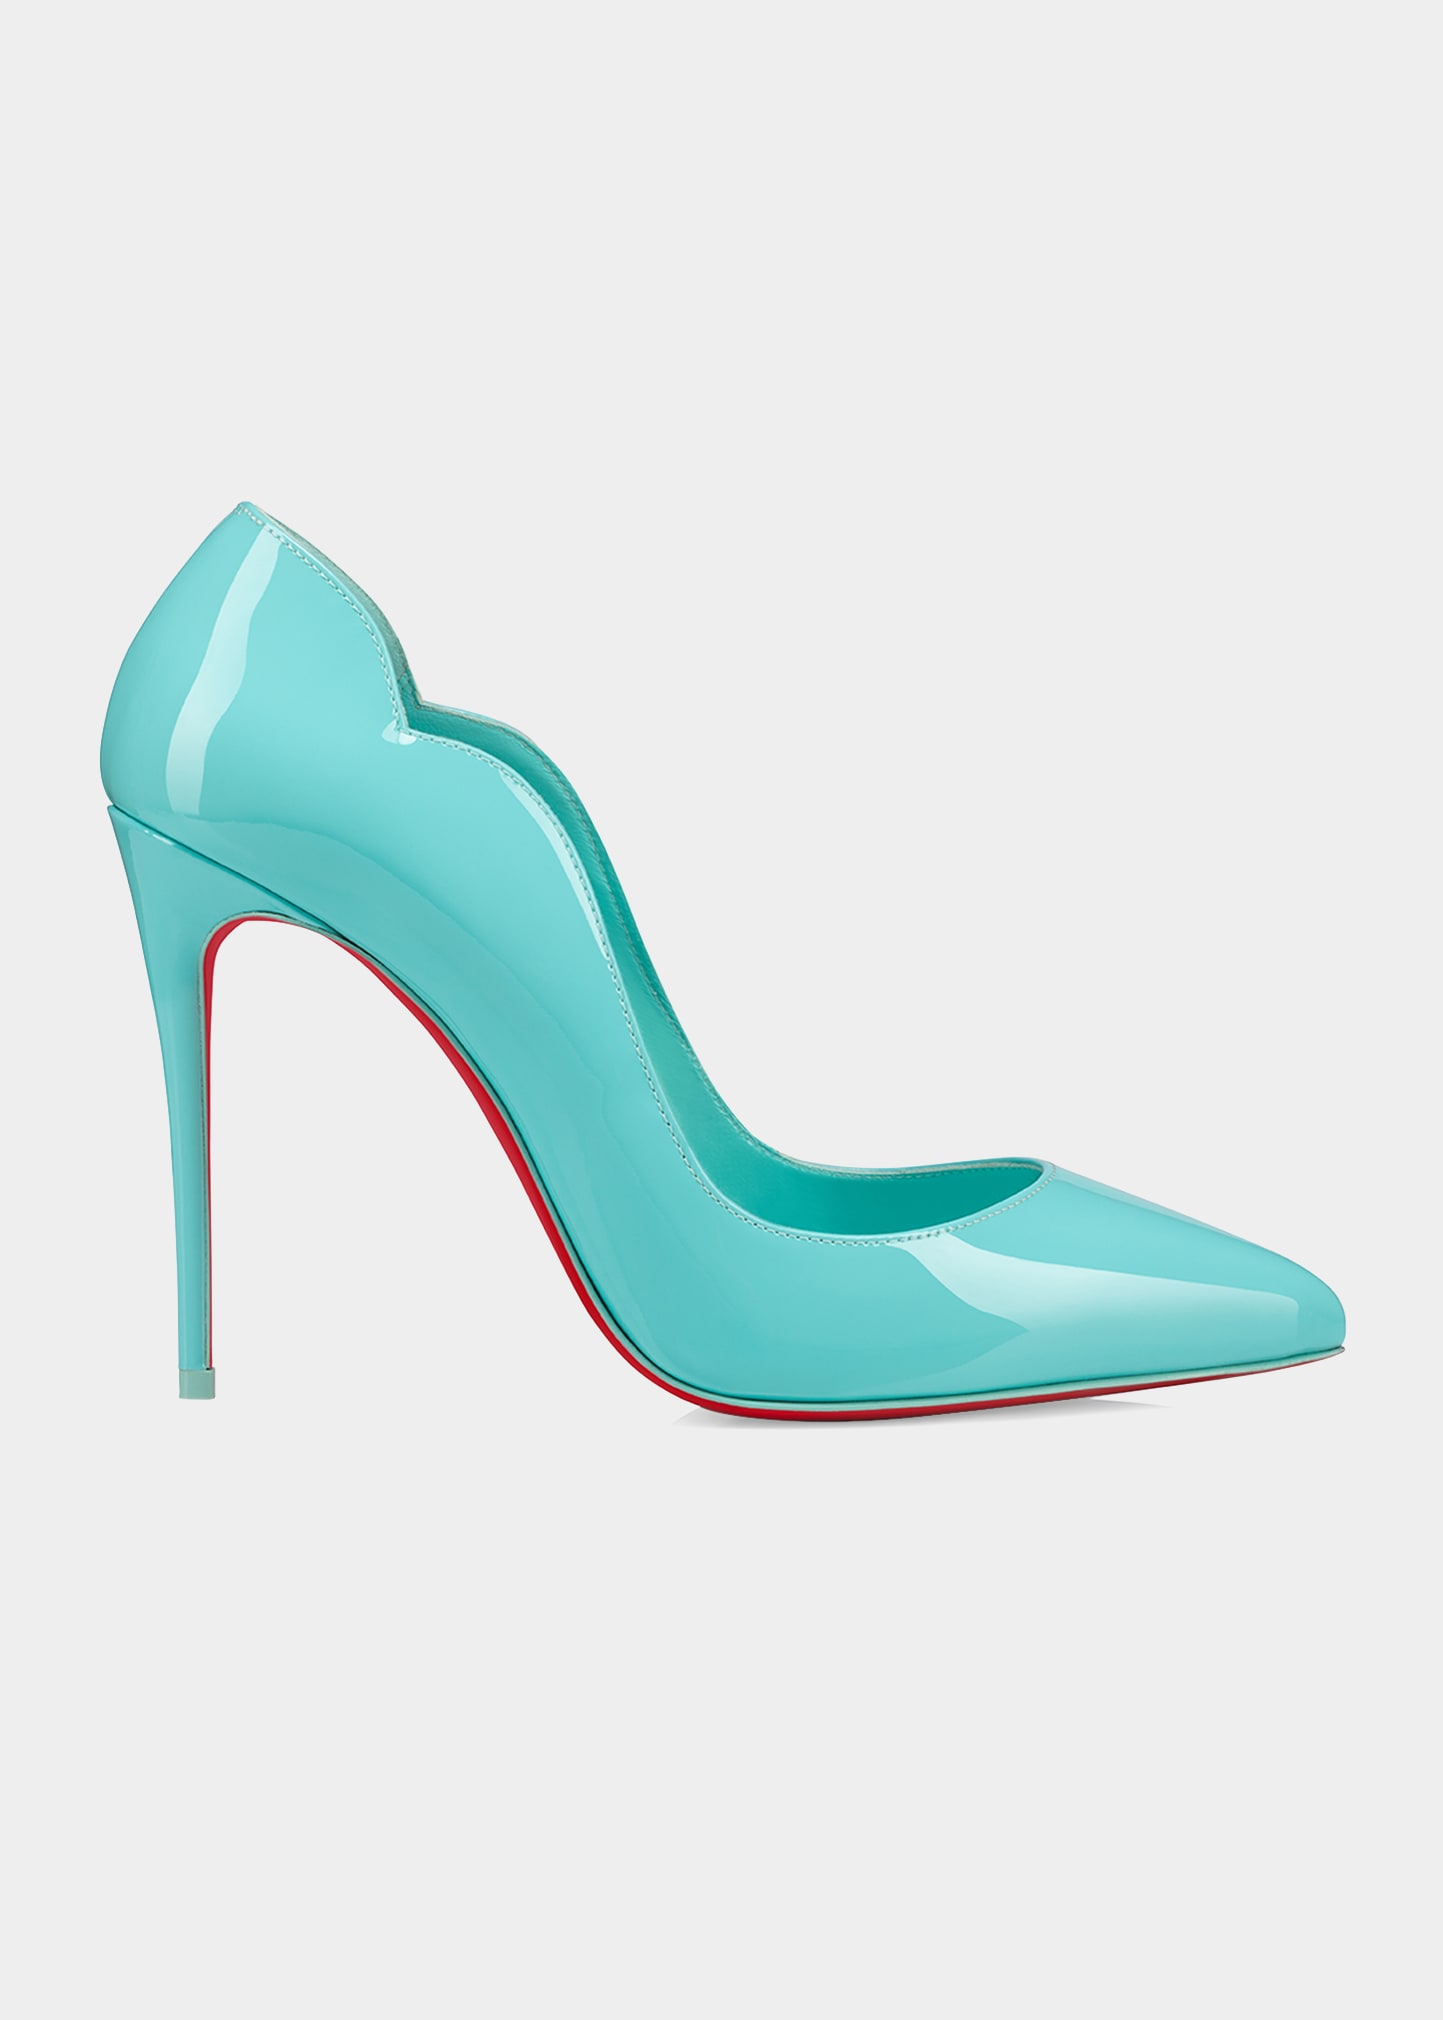 Christian Louboutin Hot Chick 100mm Patent Red Sole High-Heel Pumps